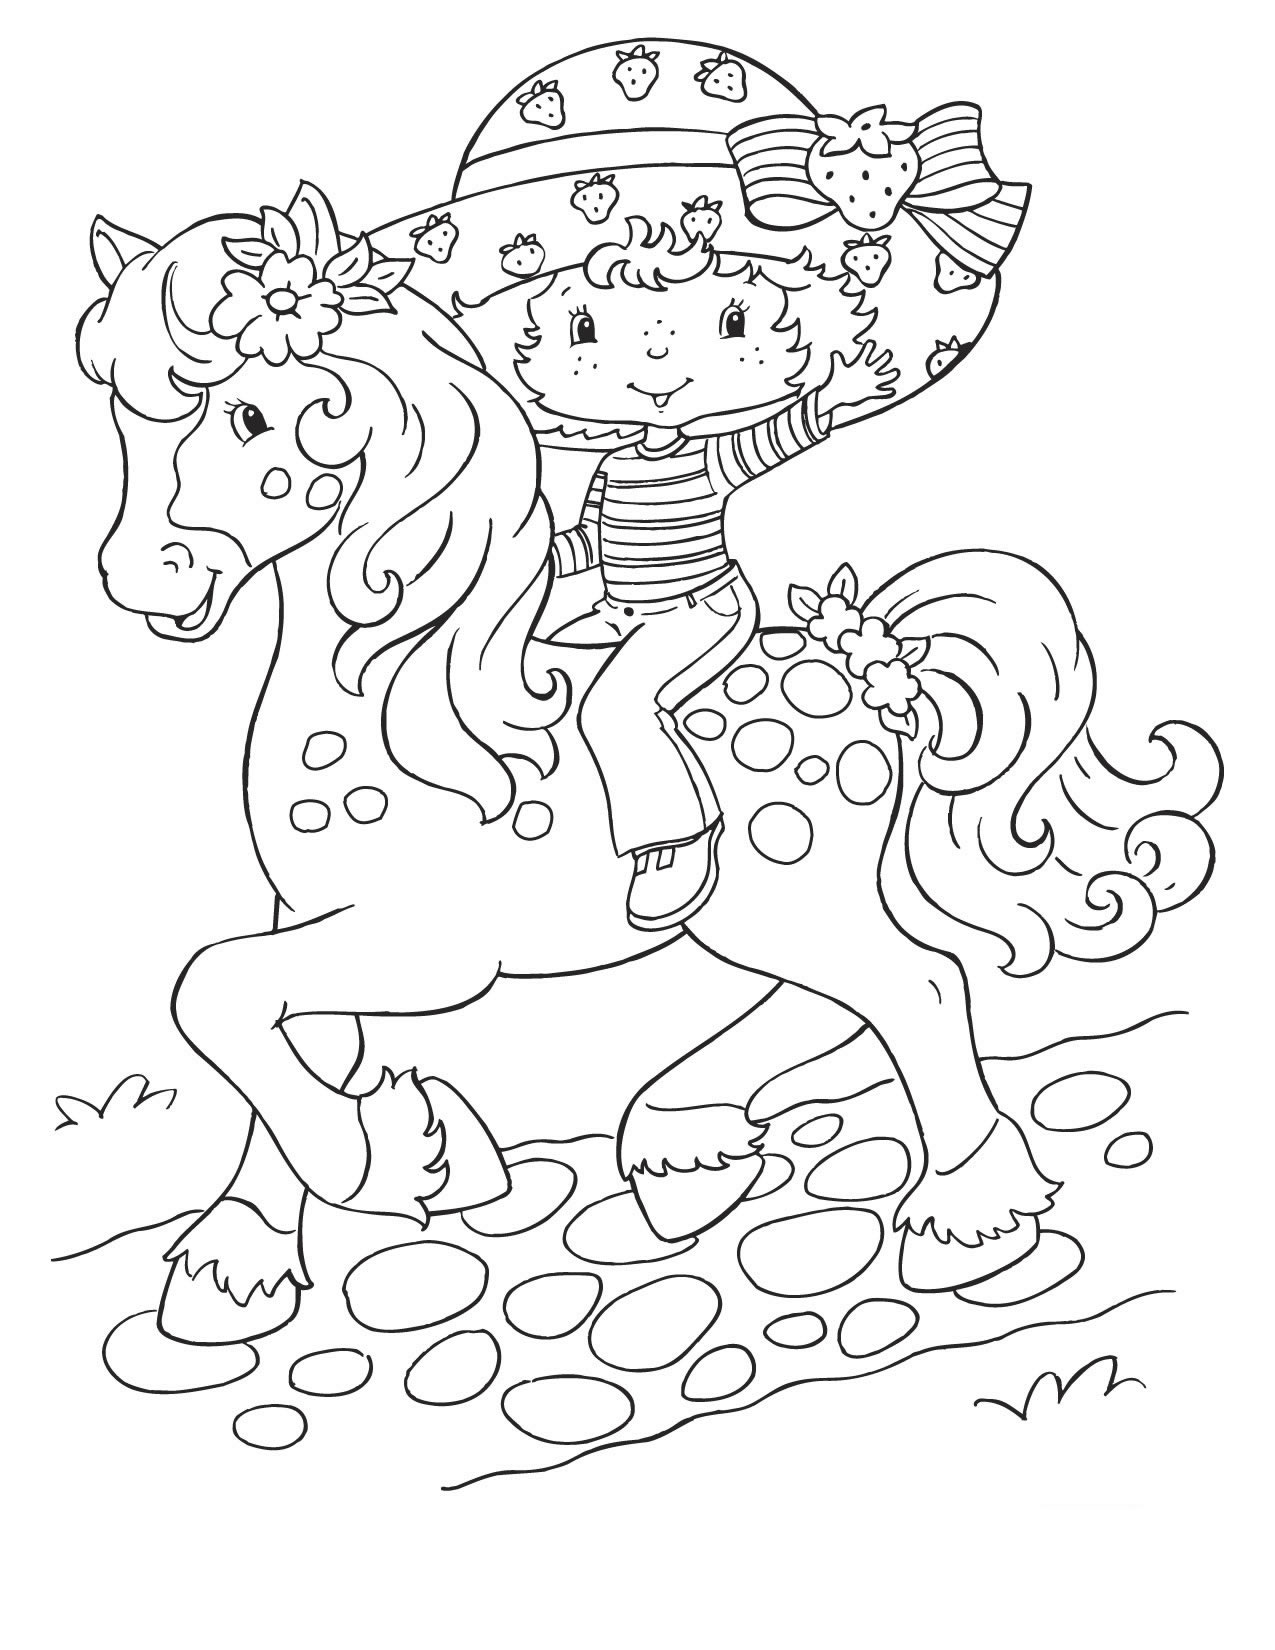 Coloring Pages For Children Strawberry Shortcake 53467 